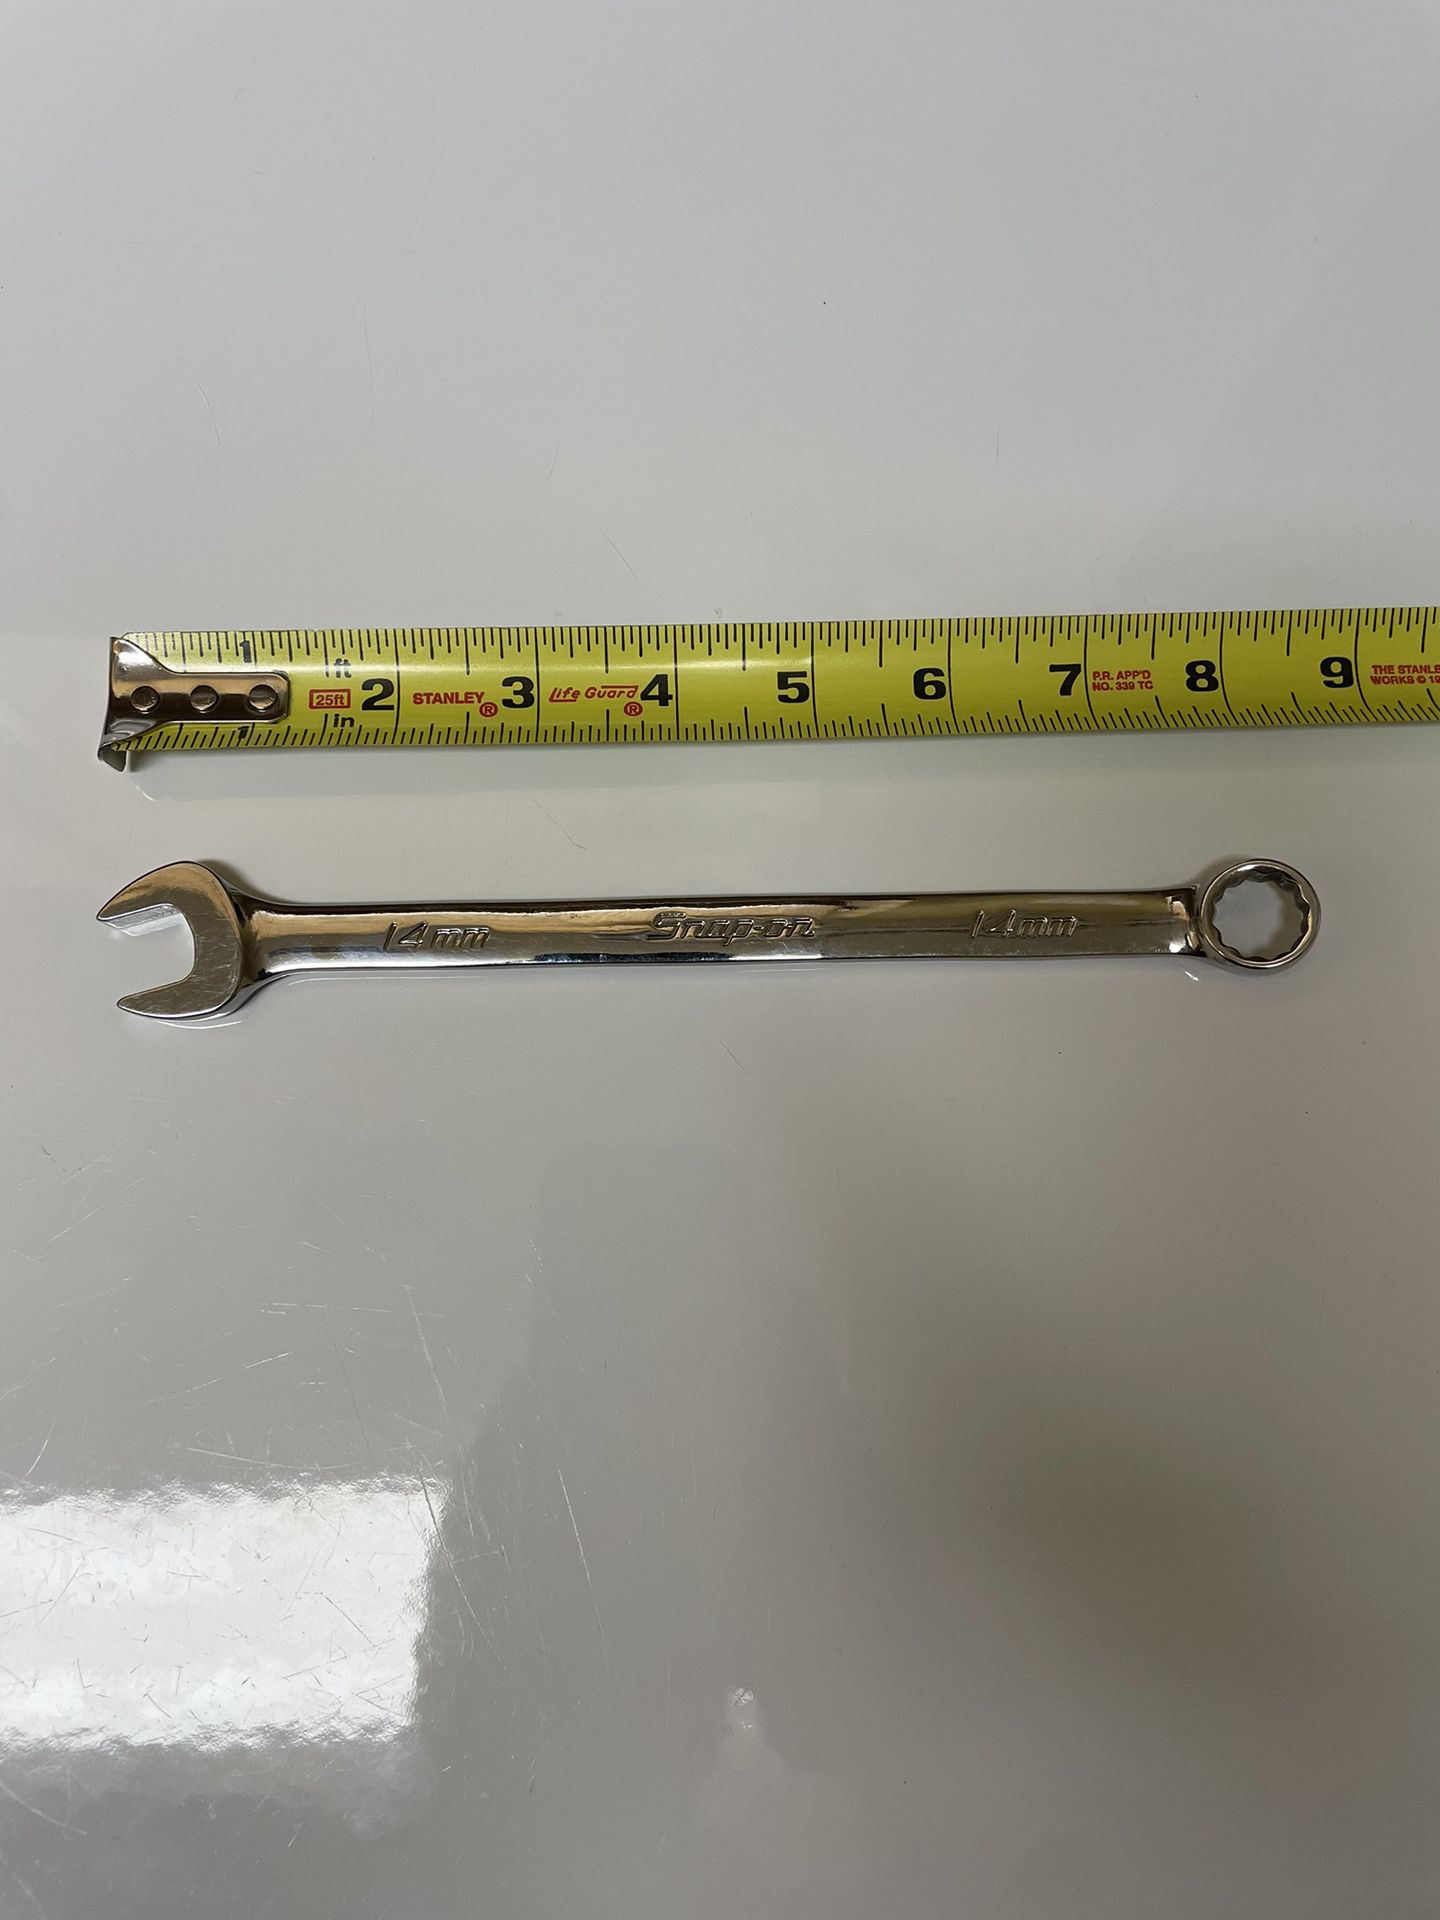 Snap-On 14 Mm  Wrench